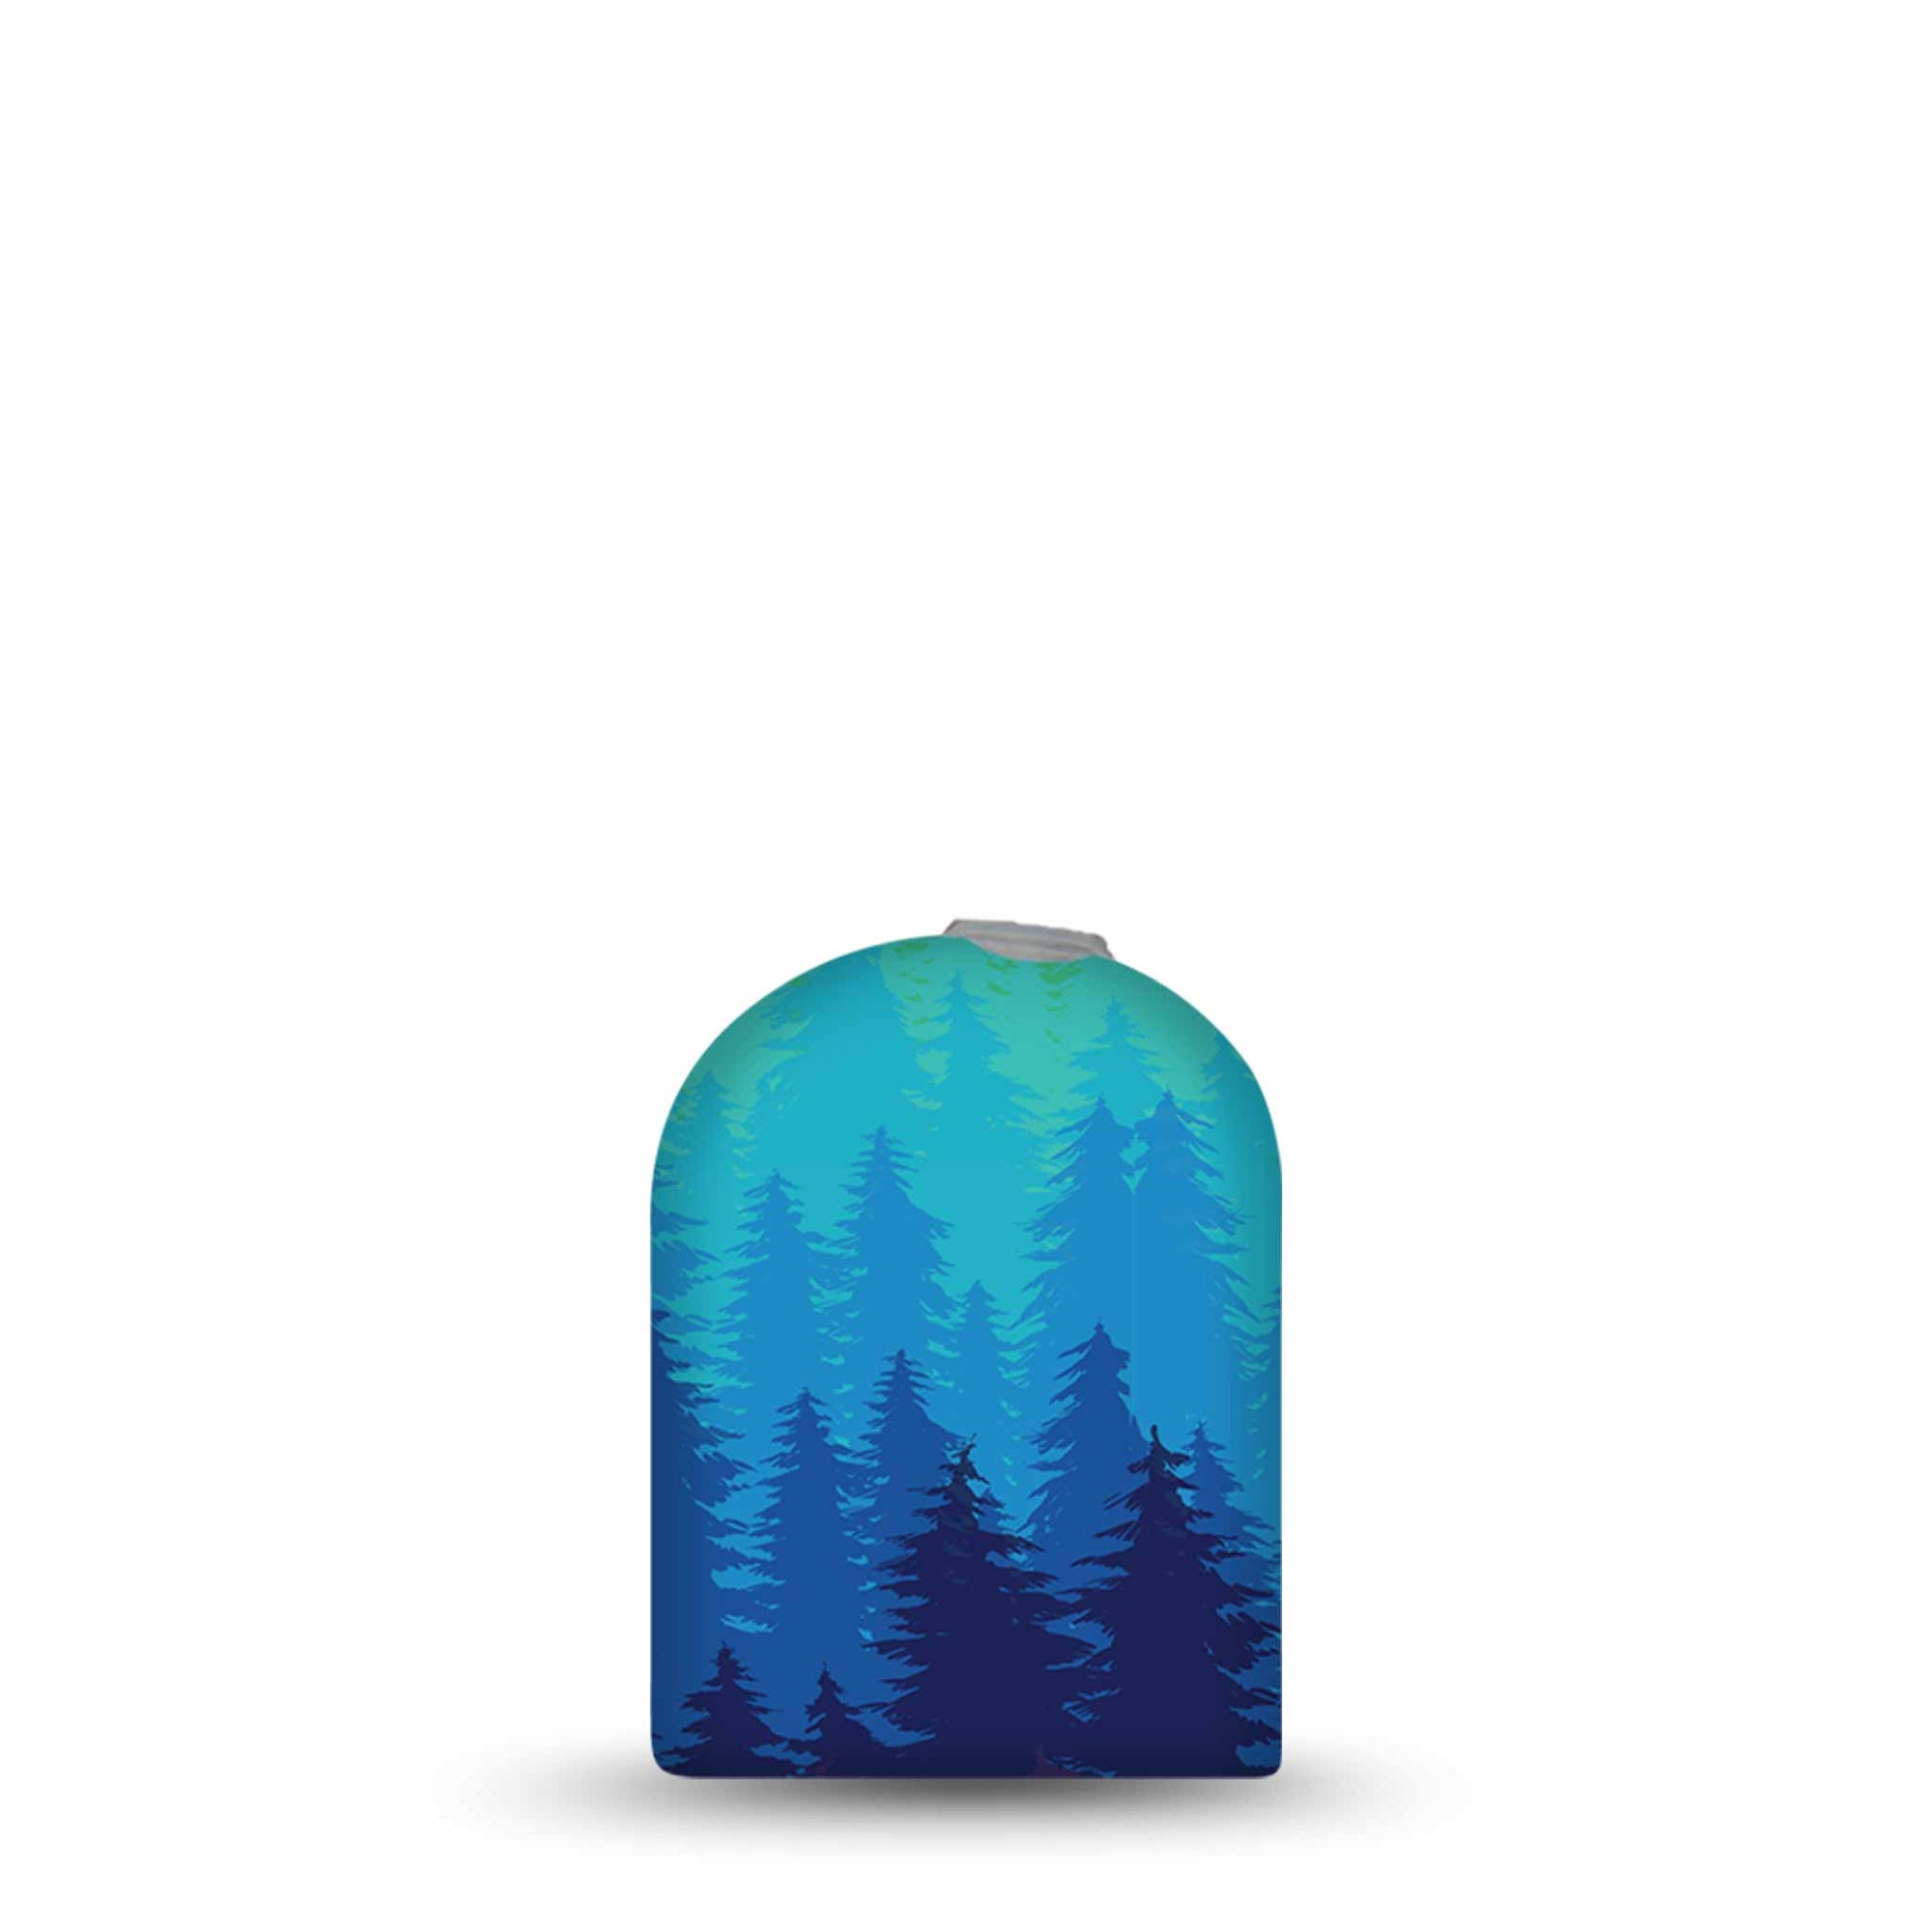 ExpressionMed Pine Trees Pod Transmitter Sticker